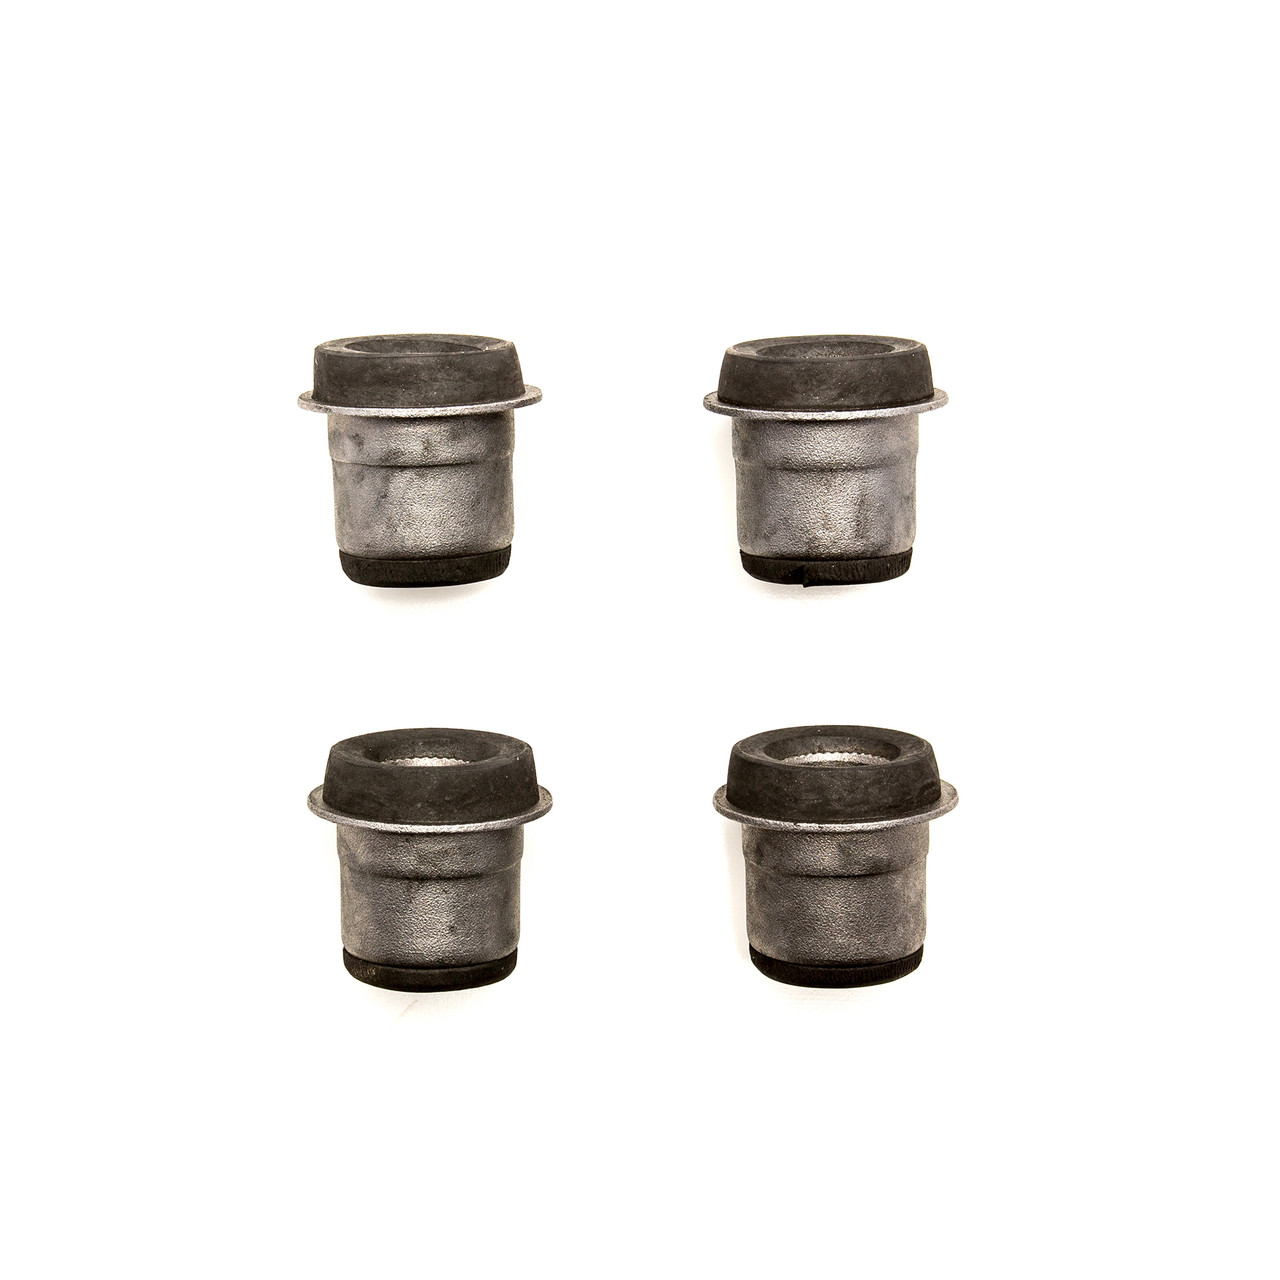 1957 1958 Ford Mercury 1958 1959 1960 Edsel Full Size Ford Thunderbird Upper and Lower Control Arm Bushing Set